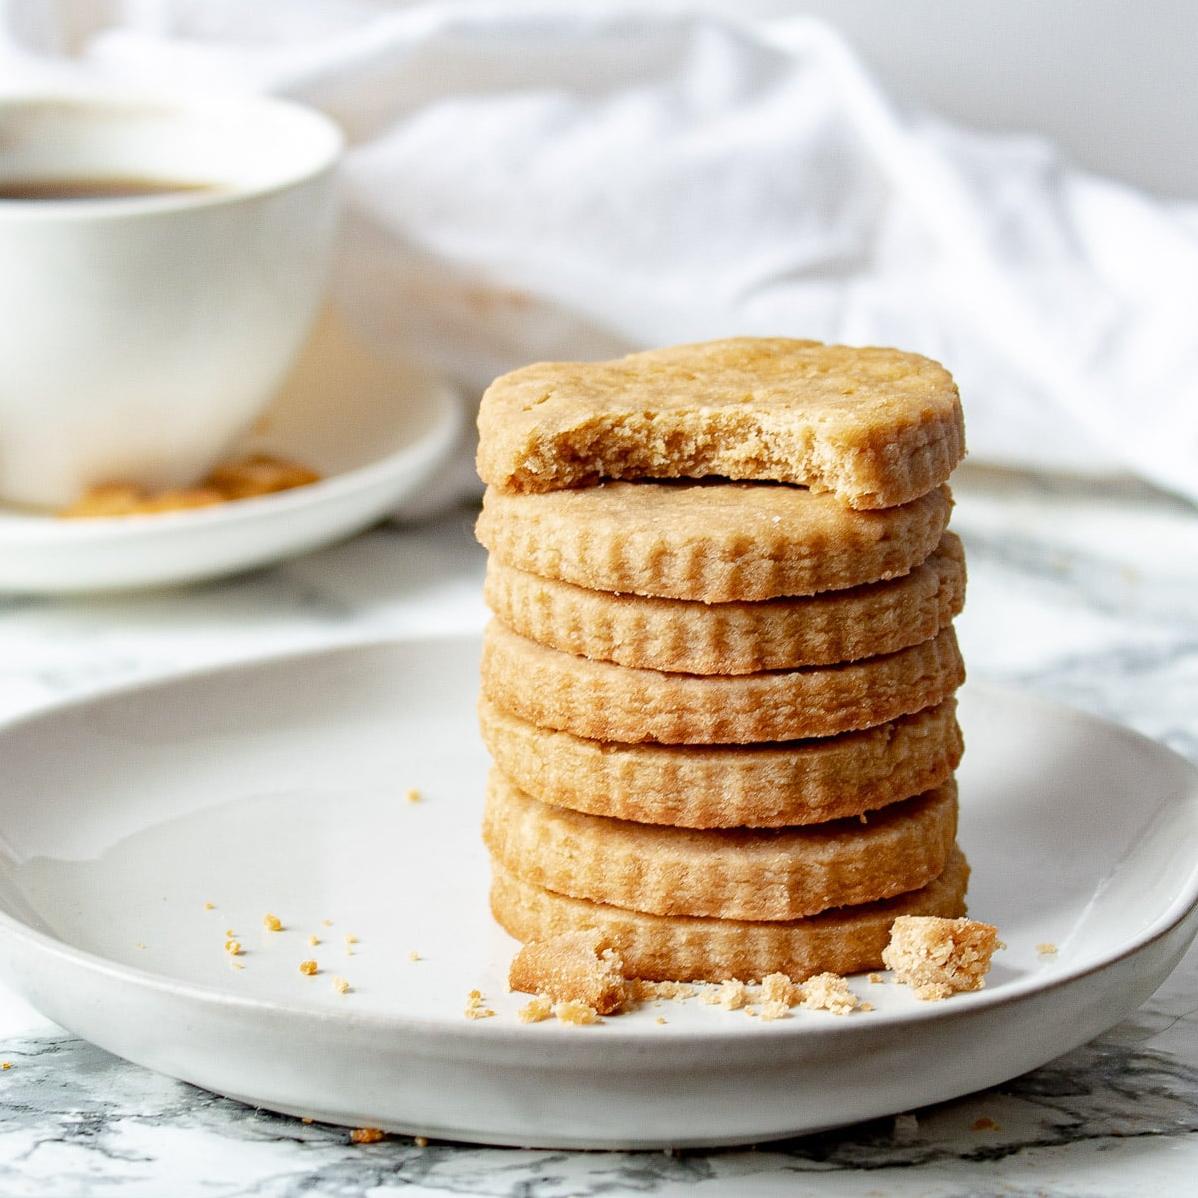  This buttery shortbread with brown sugar is the comfort food you need!